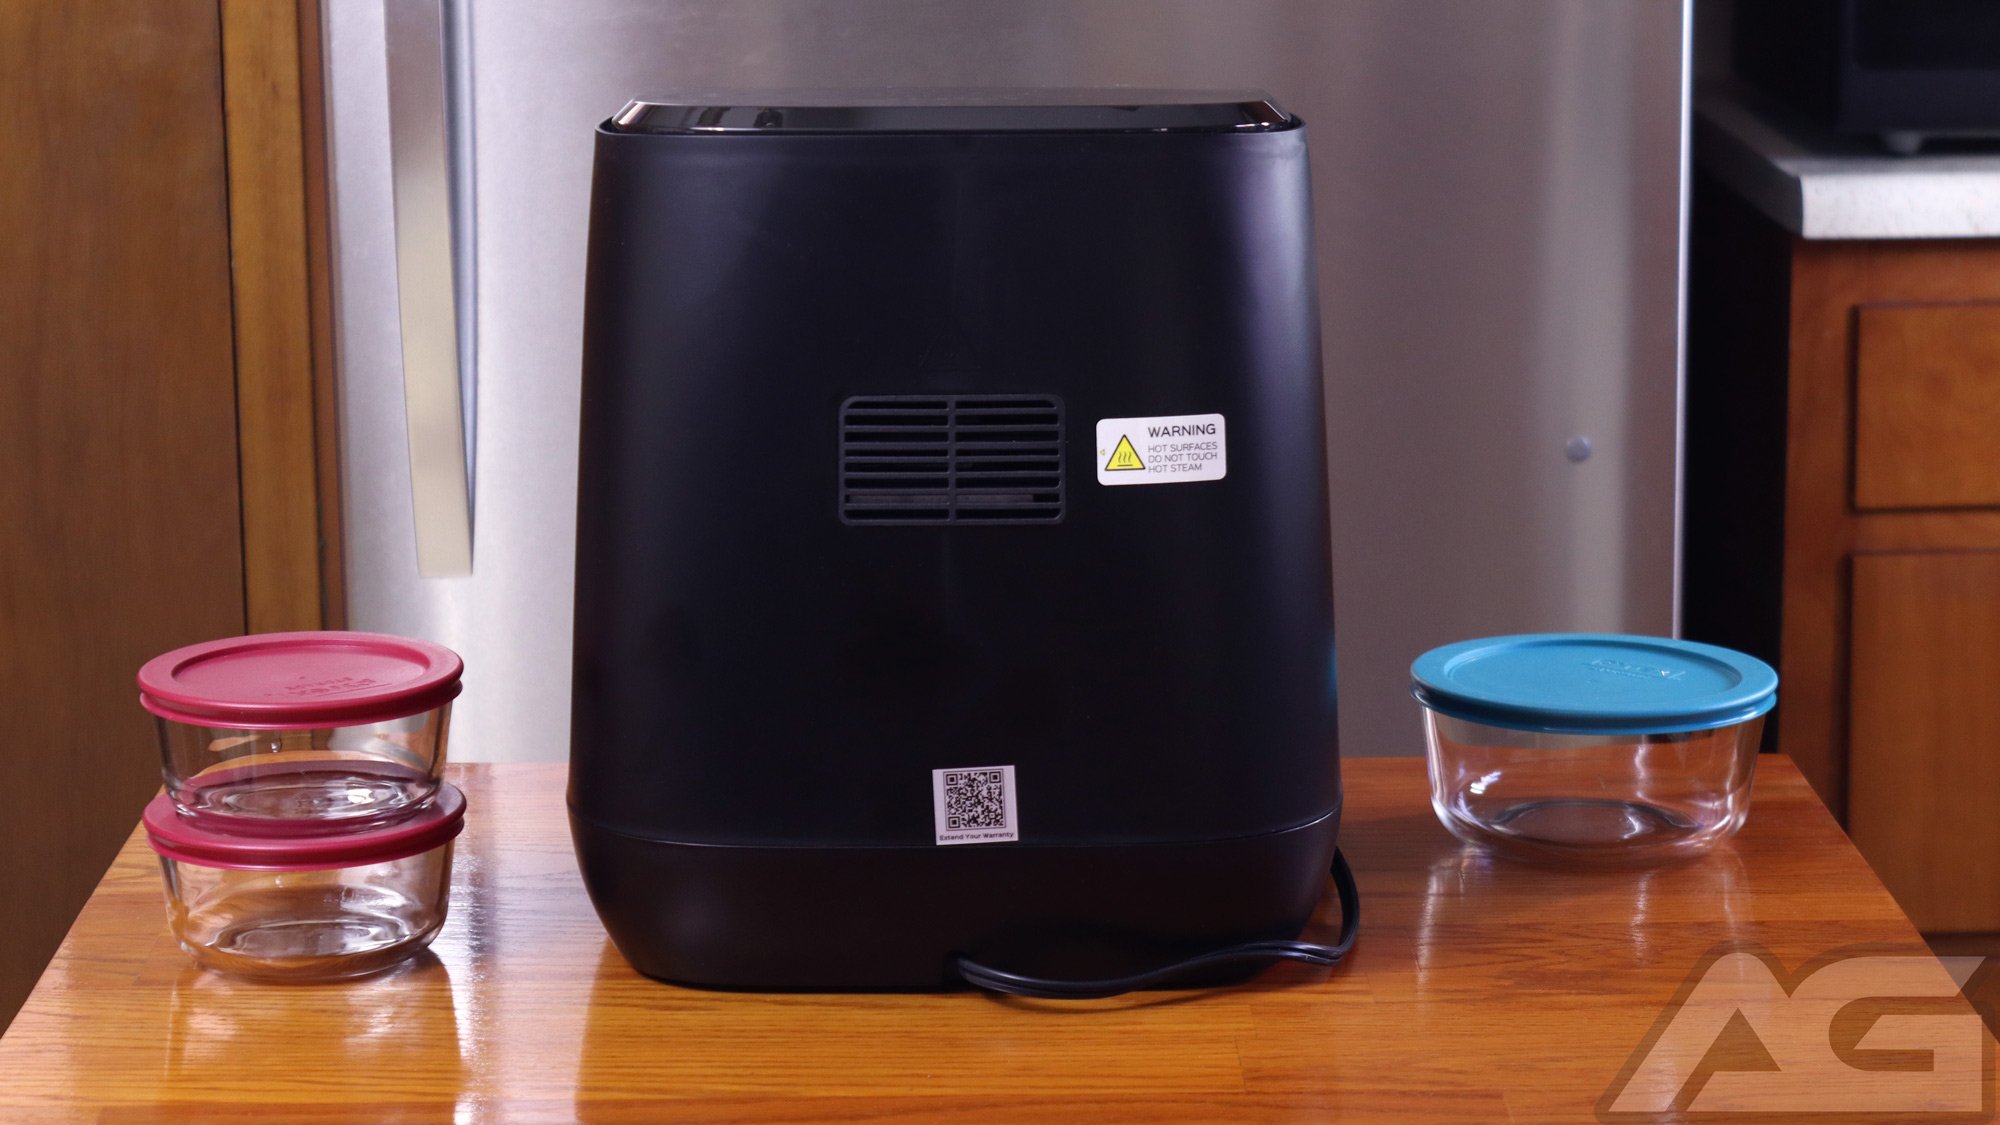 Get healthier home cooking with the Philips Essential Air Fryer- now 25%  off on